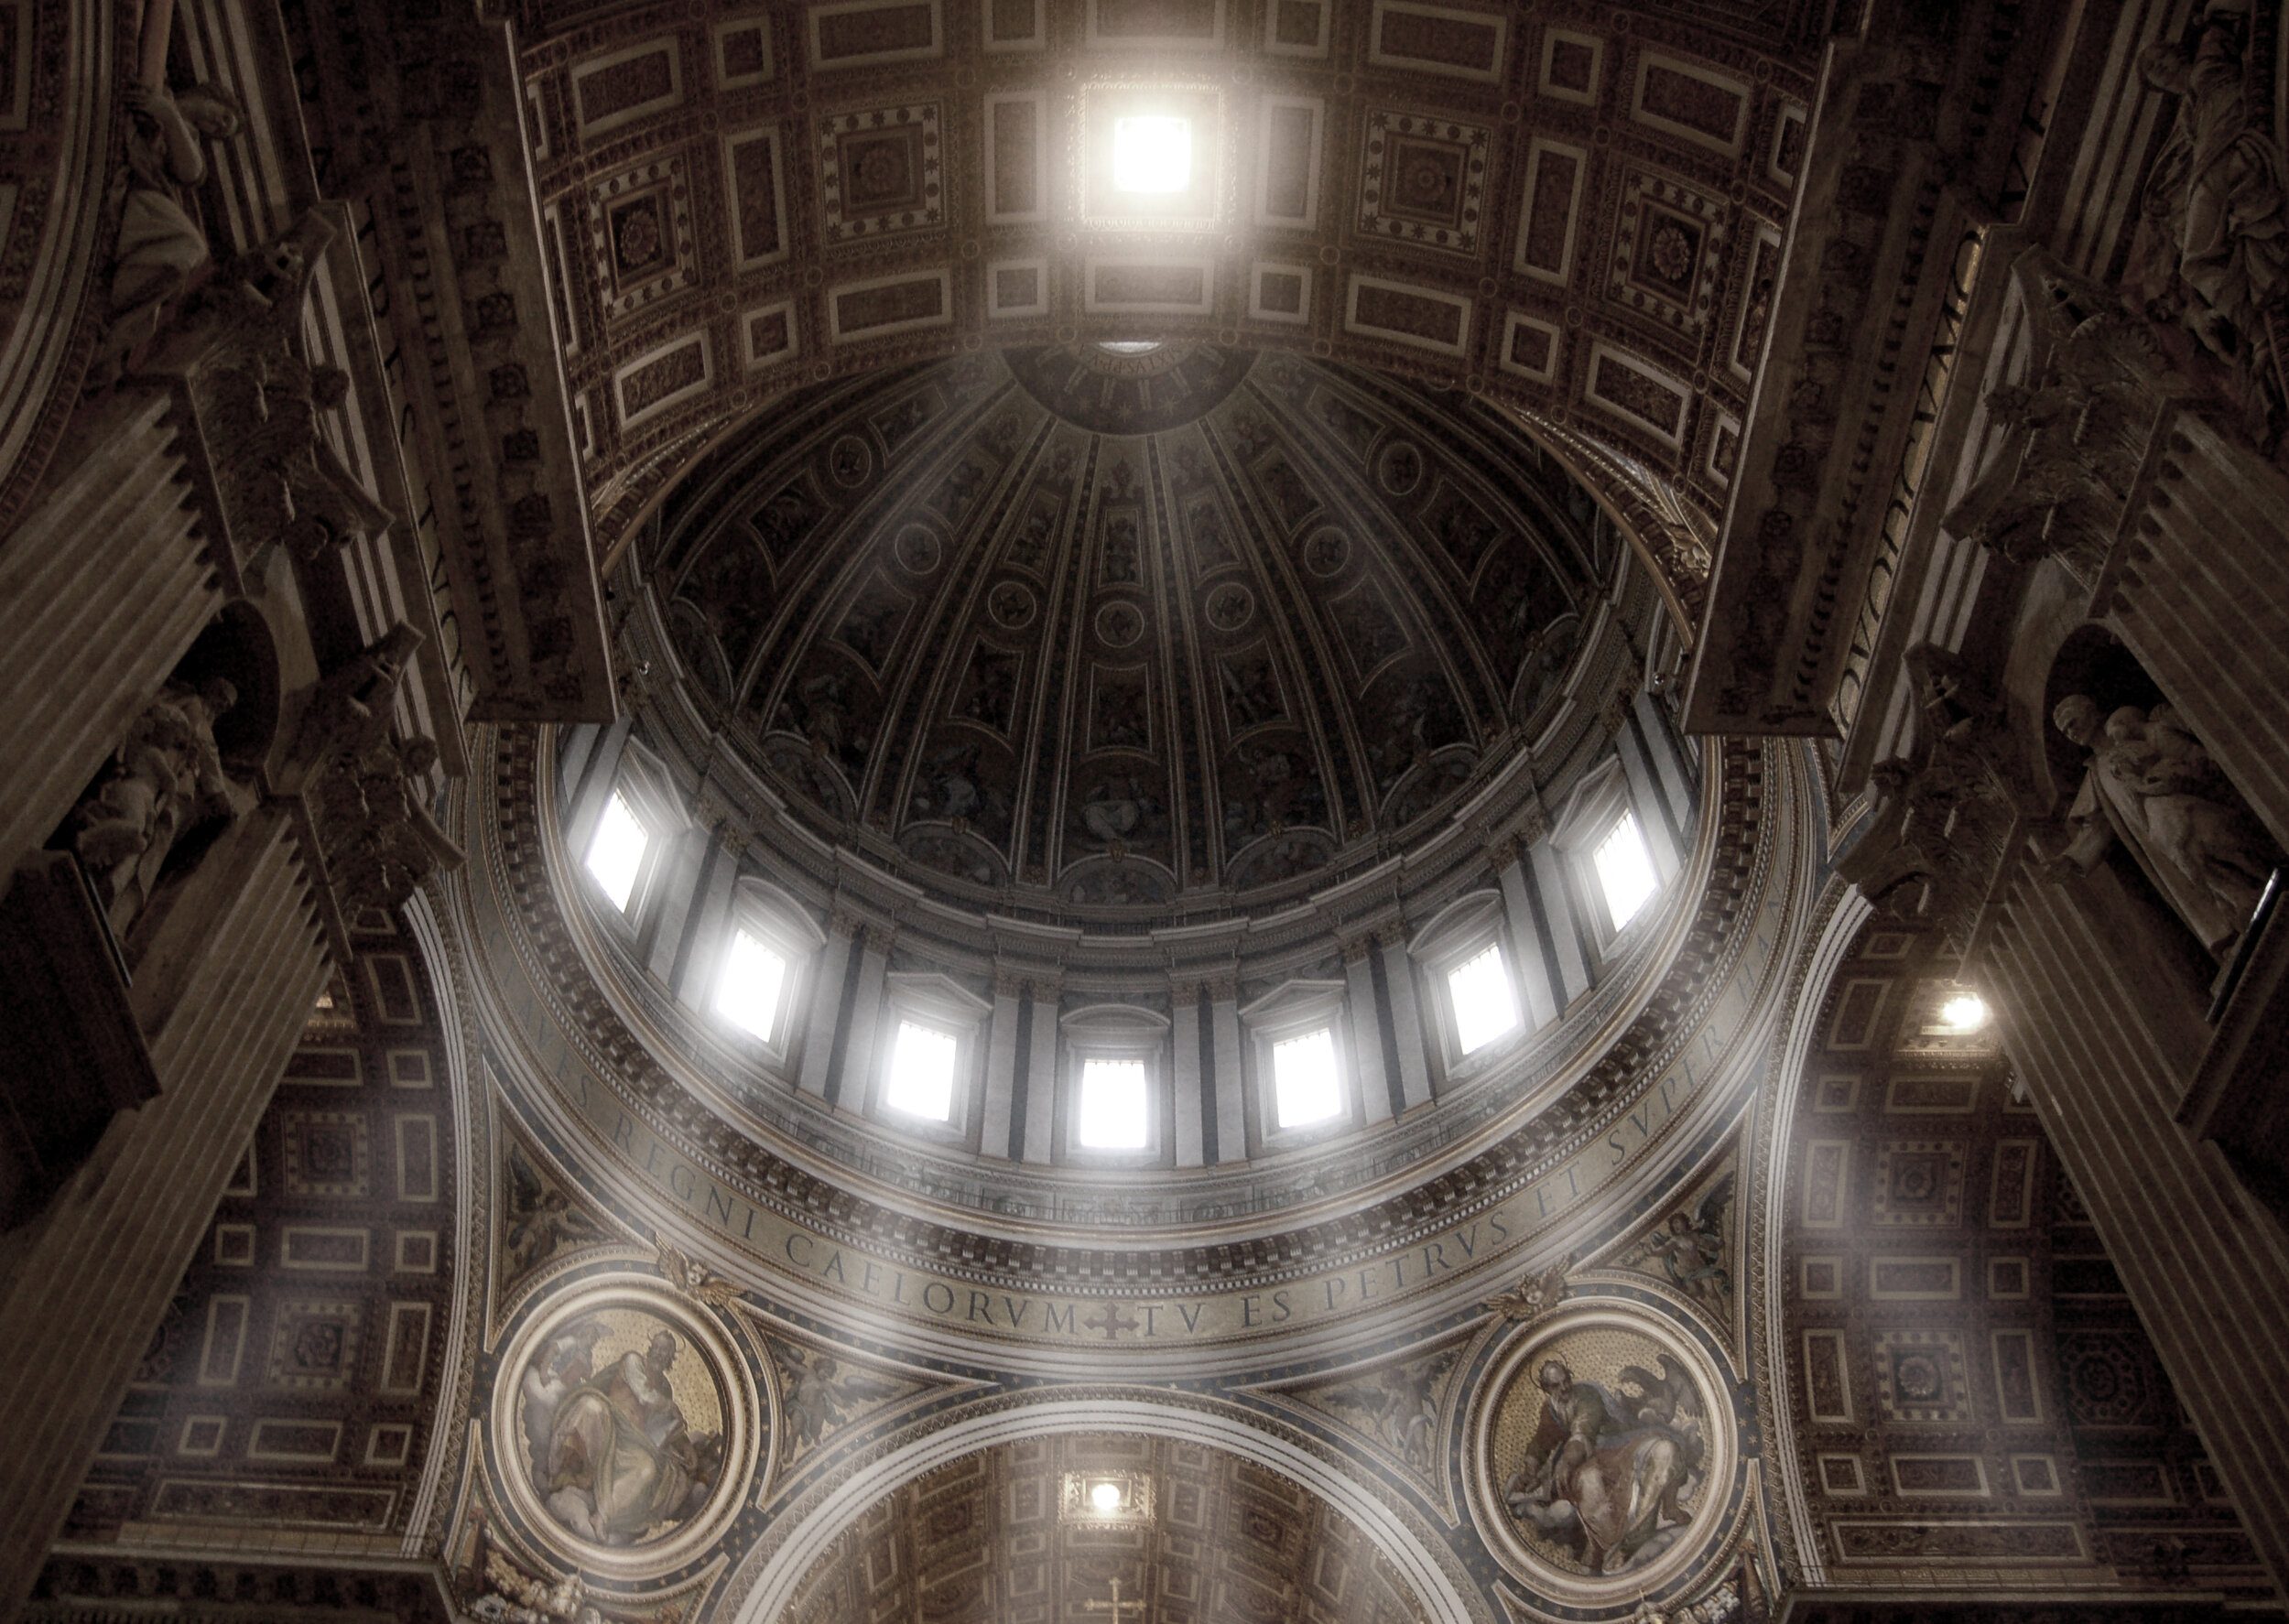 title: St. Peters Interior